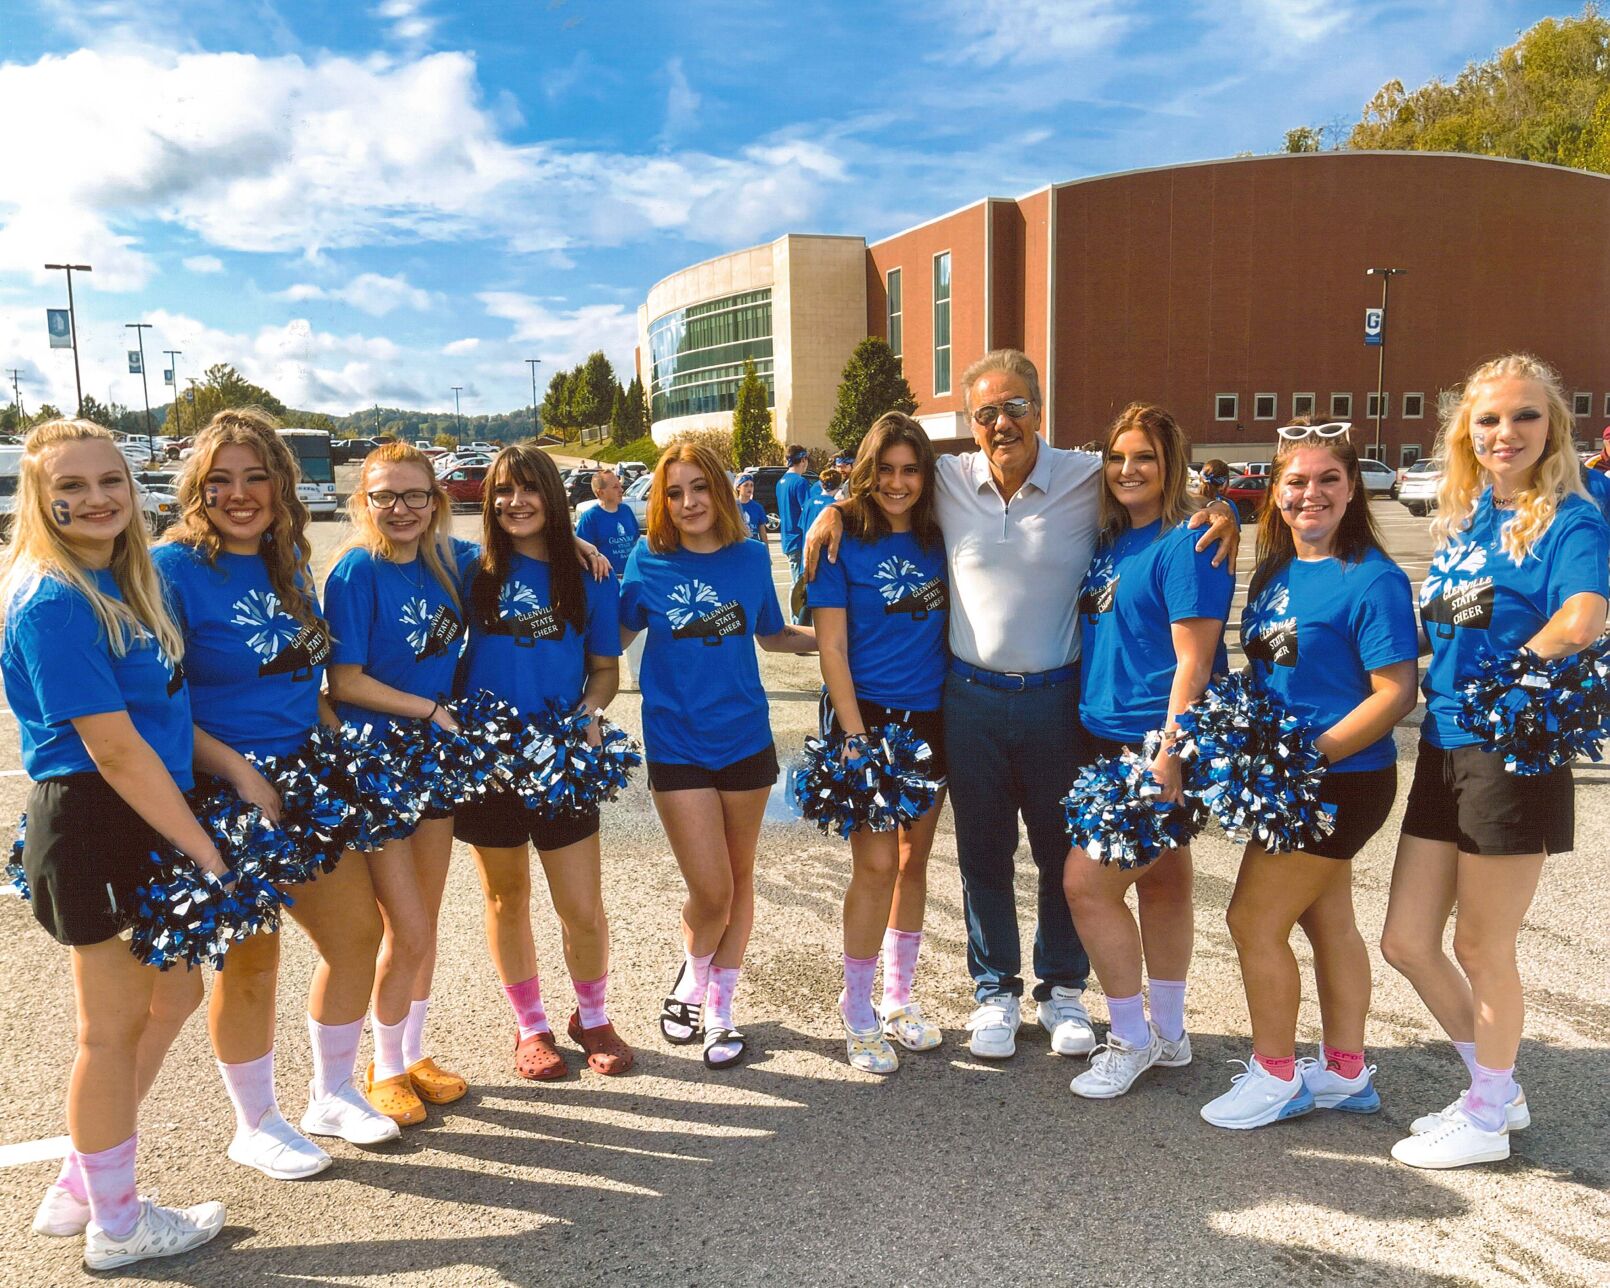 Former cheerleaders to be honored at Glenville State College (West